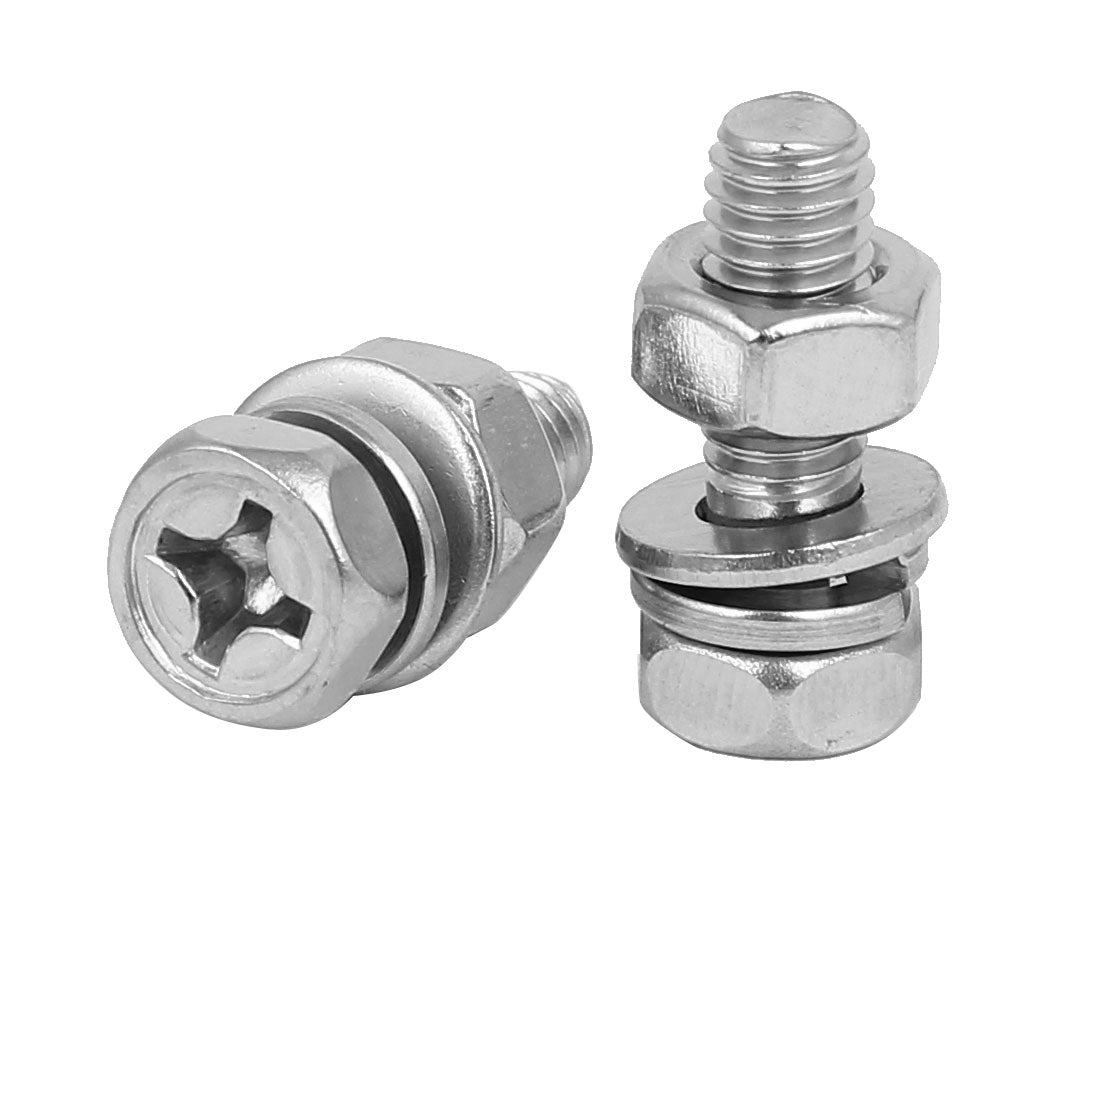 uxcell Uxcell M6 x 18mm 304 Stainless Steel Phillips Hex Head Bolts Nuts w Washers 8 Sets